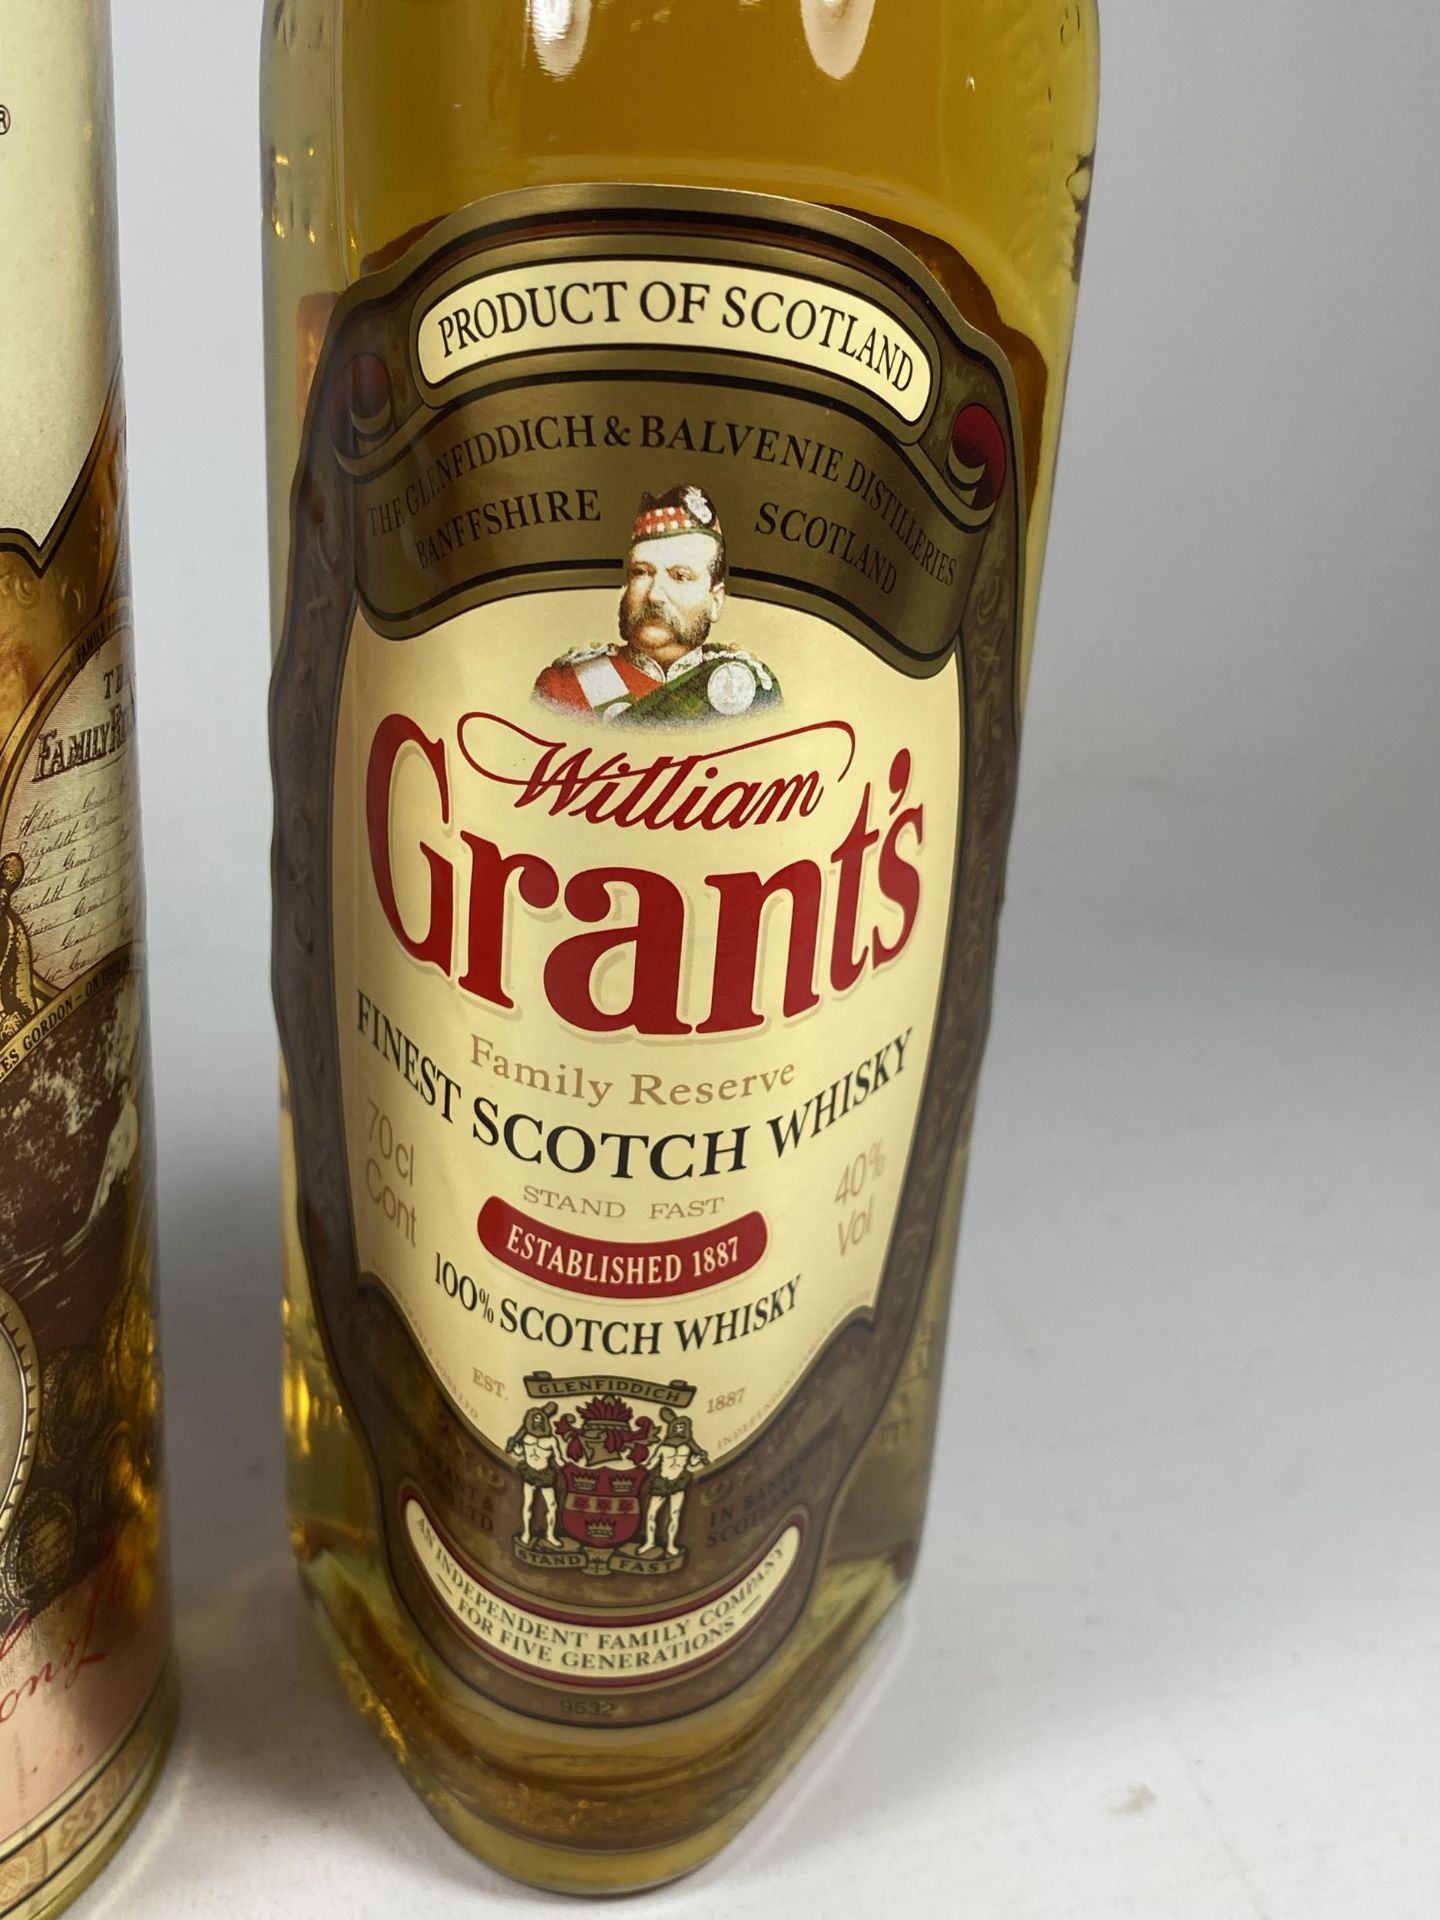 1 X 70CL BOXED BOTTLE - WILLIAM GRANTS FINEST SCOTCH WHISKY - Image 2 of 3